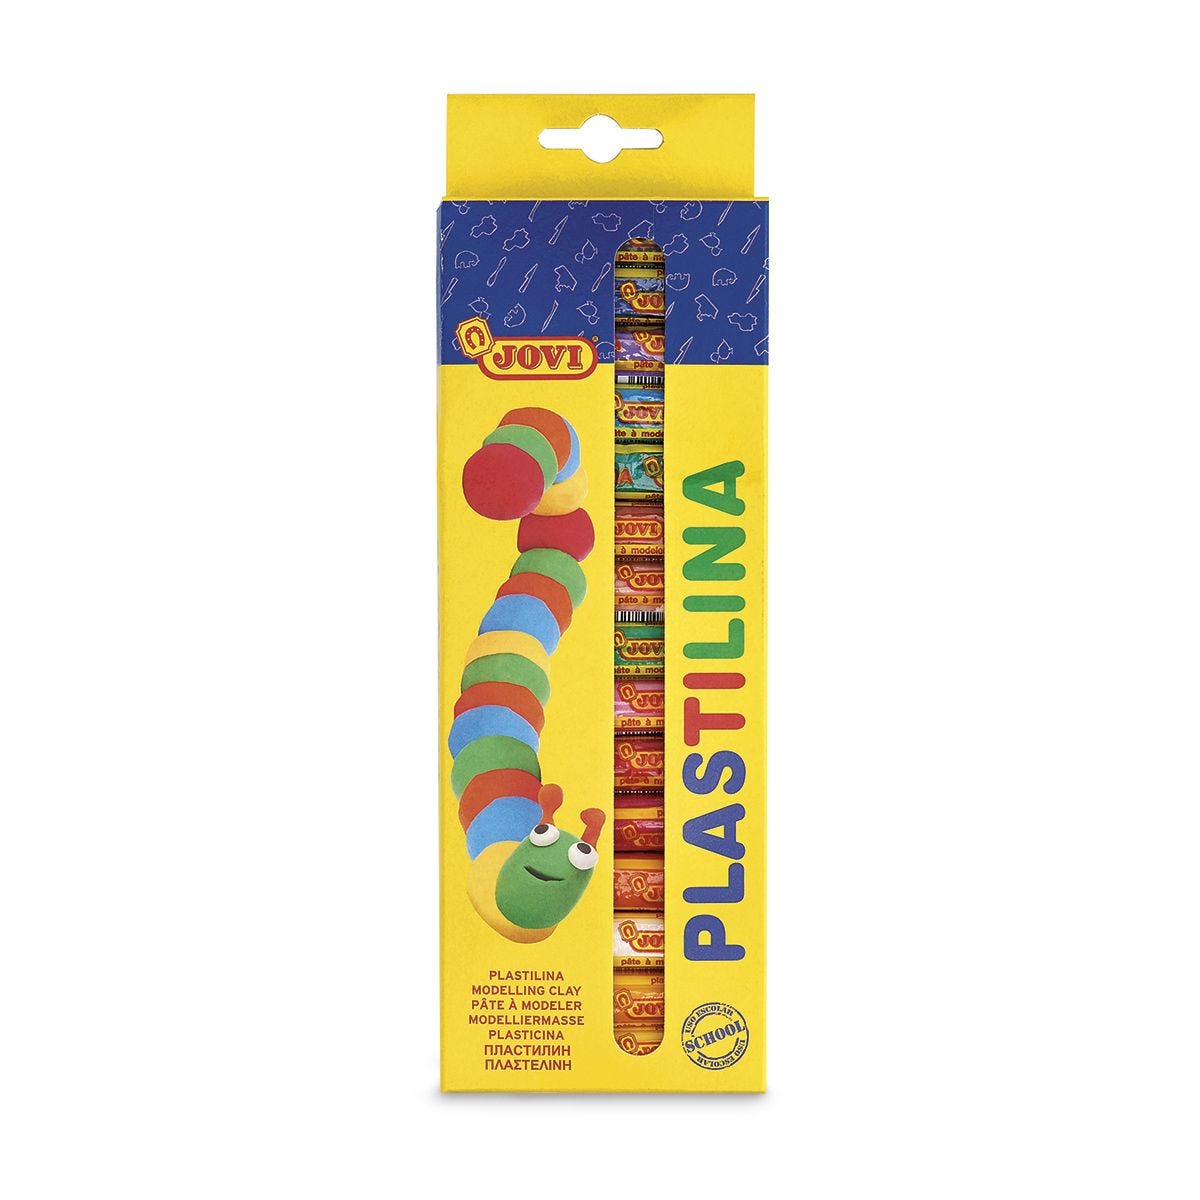 Jovi Plastilina Reusable and Non-Drying Modeling Clay; 1.75 Oz. Bars, Set  of 30, 2 Each of 15 Colors, Perfect for Arts and Crafts Projects, Multicolor